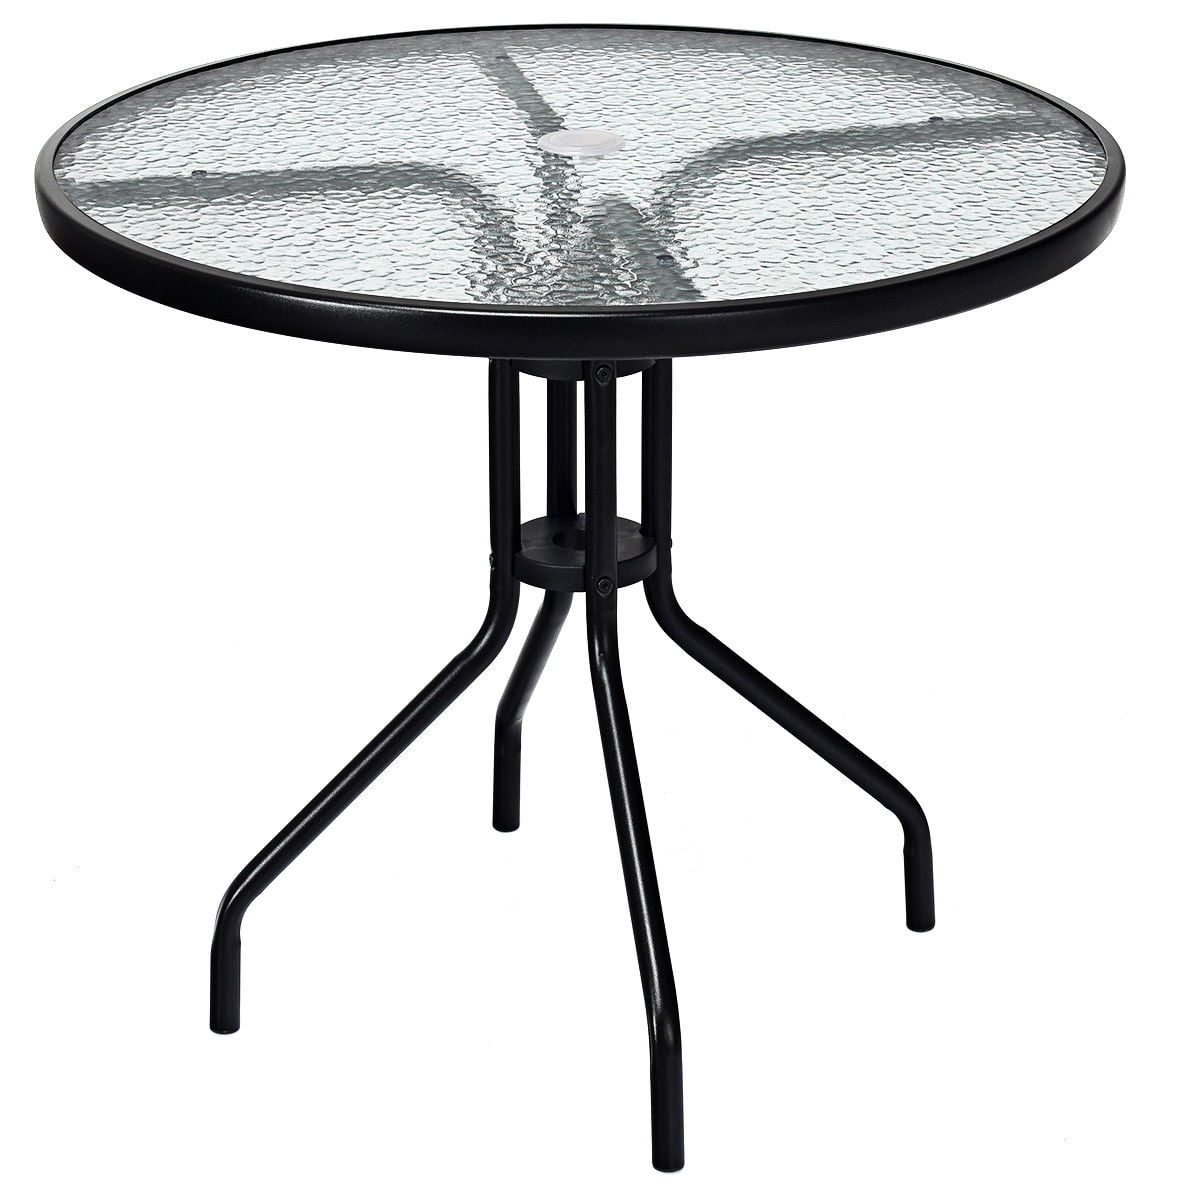 32 Patio Round Table Tempered Glass, 42 Round Glass Patio Table Top